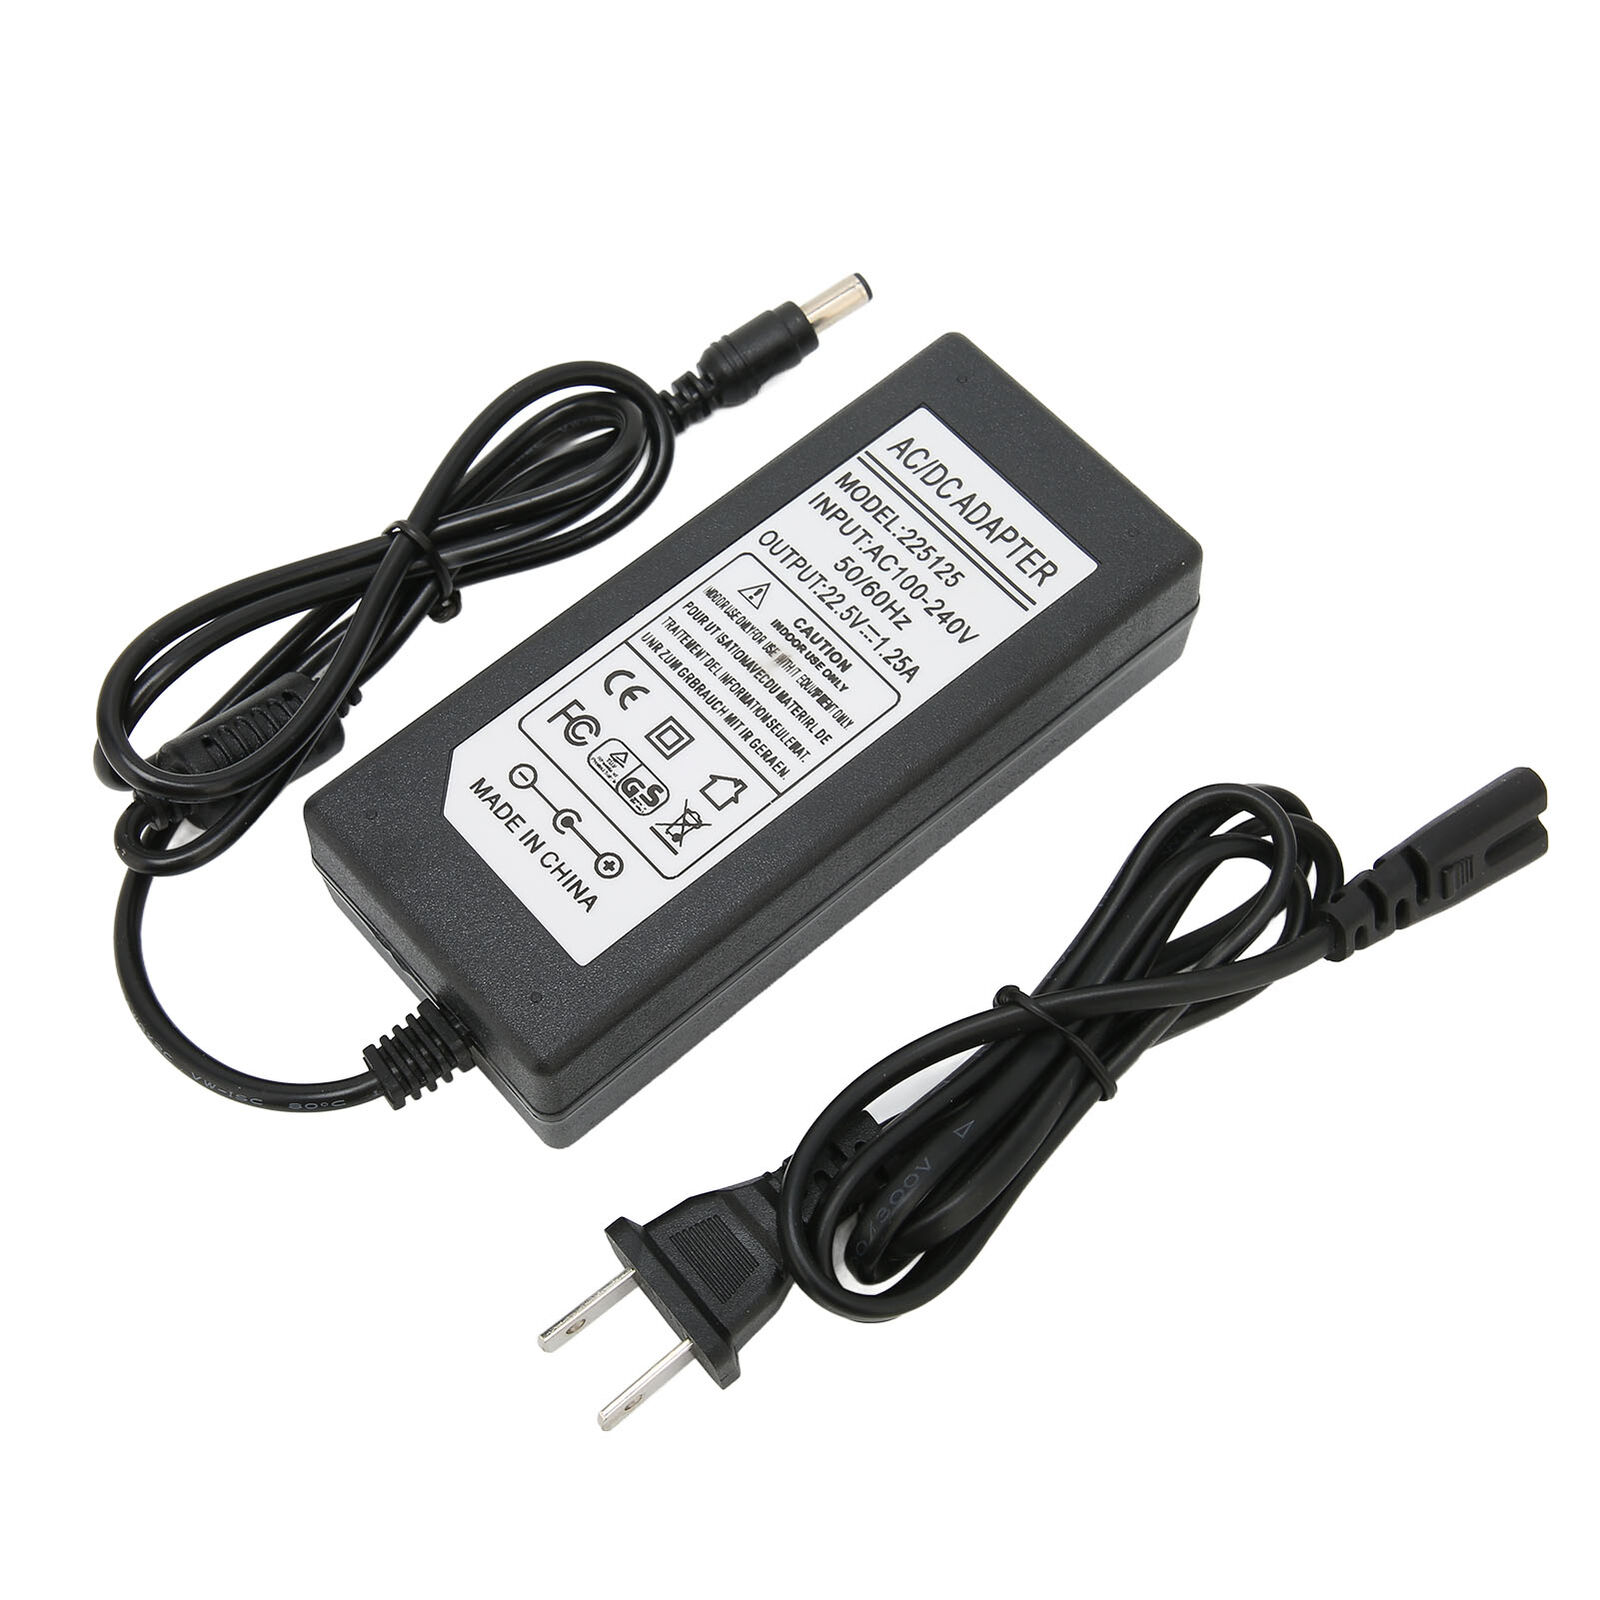 DC 22.5V Power Supply Charging Adapter Power Charger for Robot Sweeping Discover Brand: Unbranded Input Voltage: AC